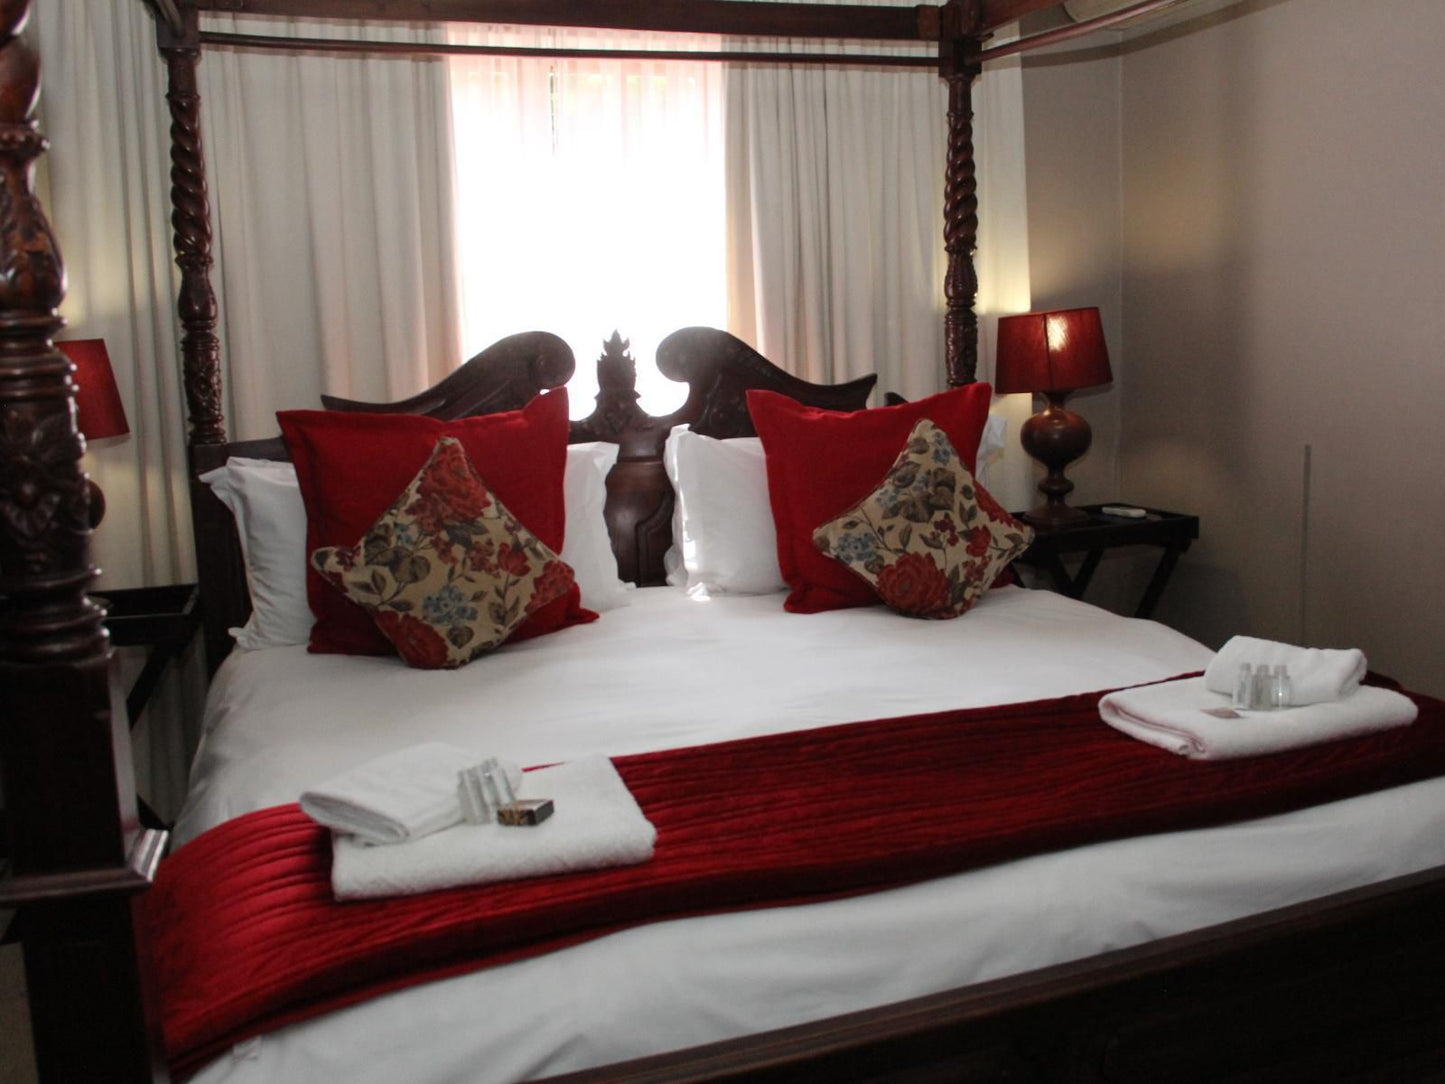 Allianto Boutique Hotel Keidebees Upington Northern Cape South Africa Bedroom